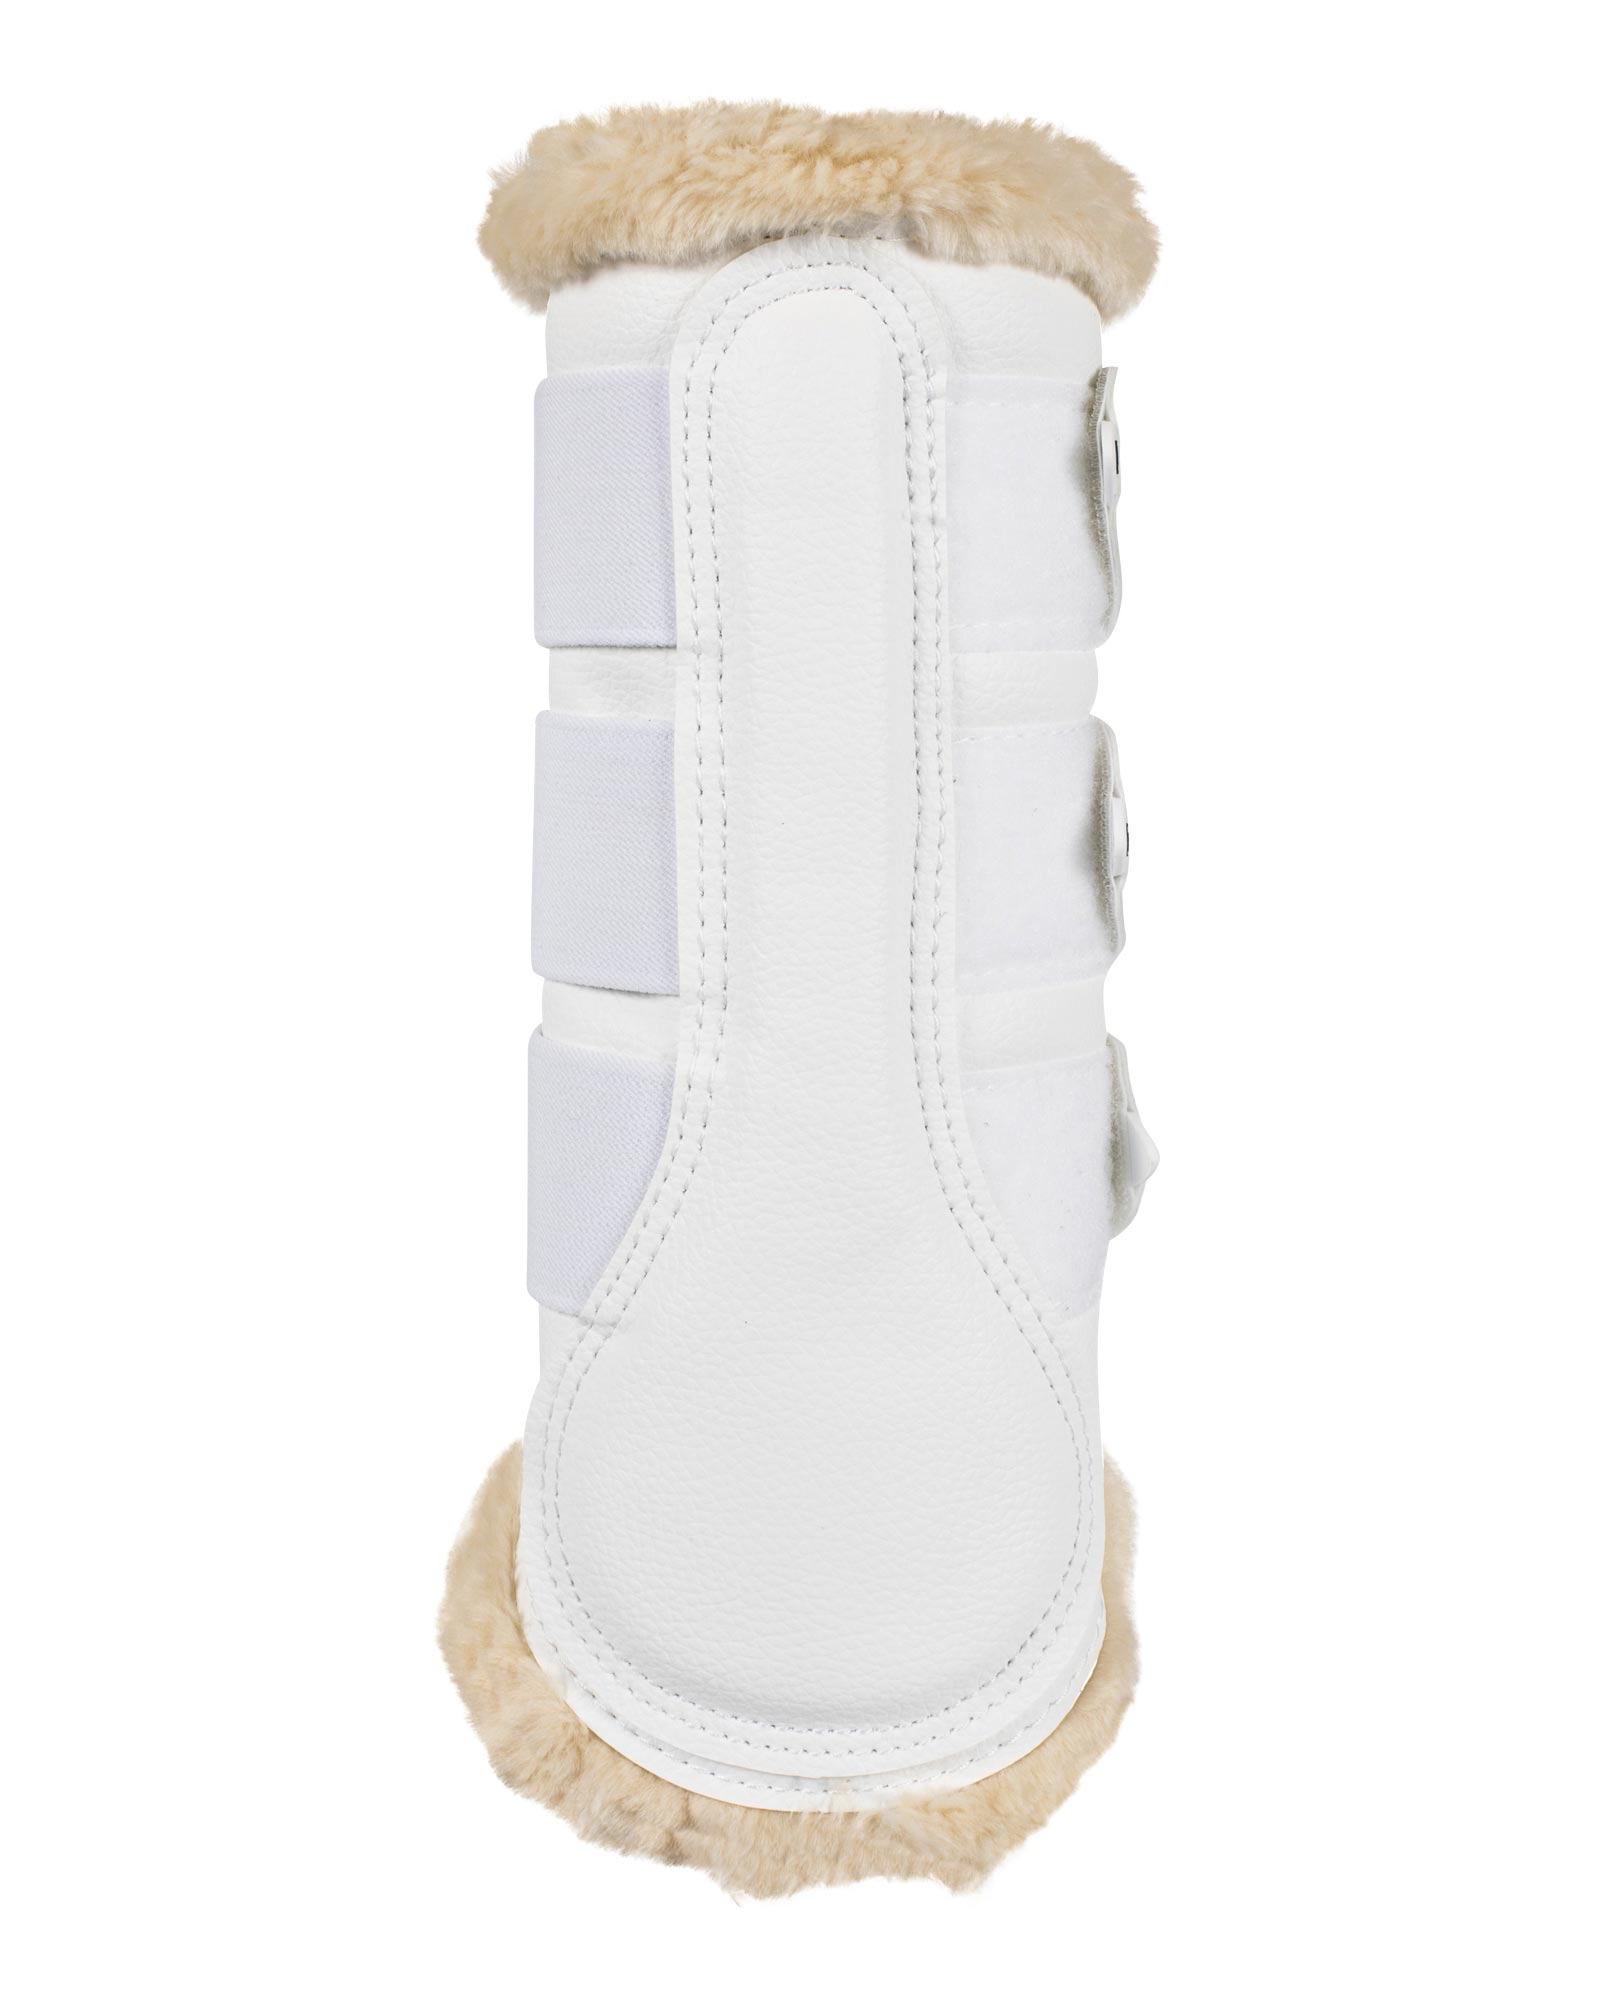 Hind brushing boots latex AC9729, Shop